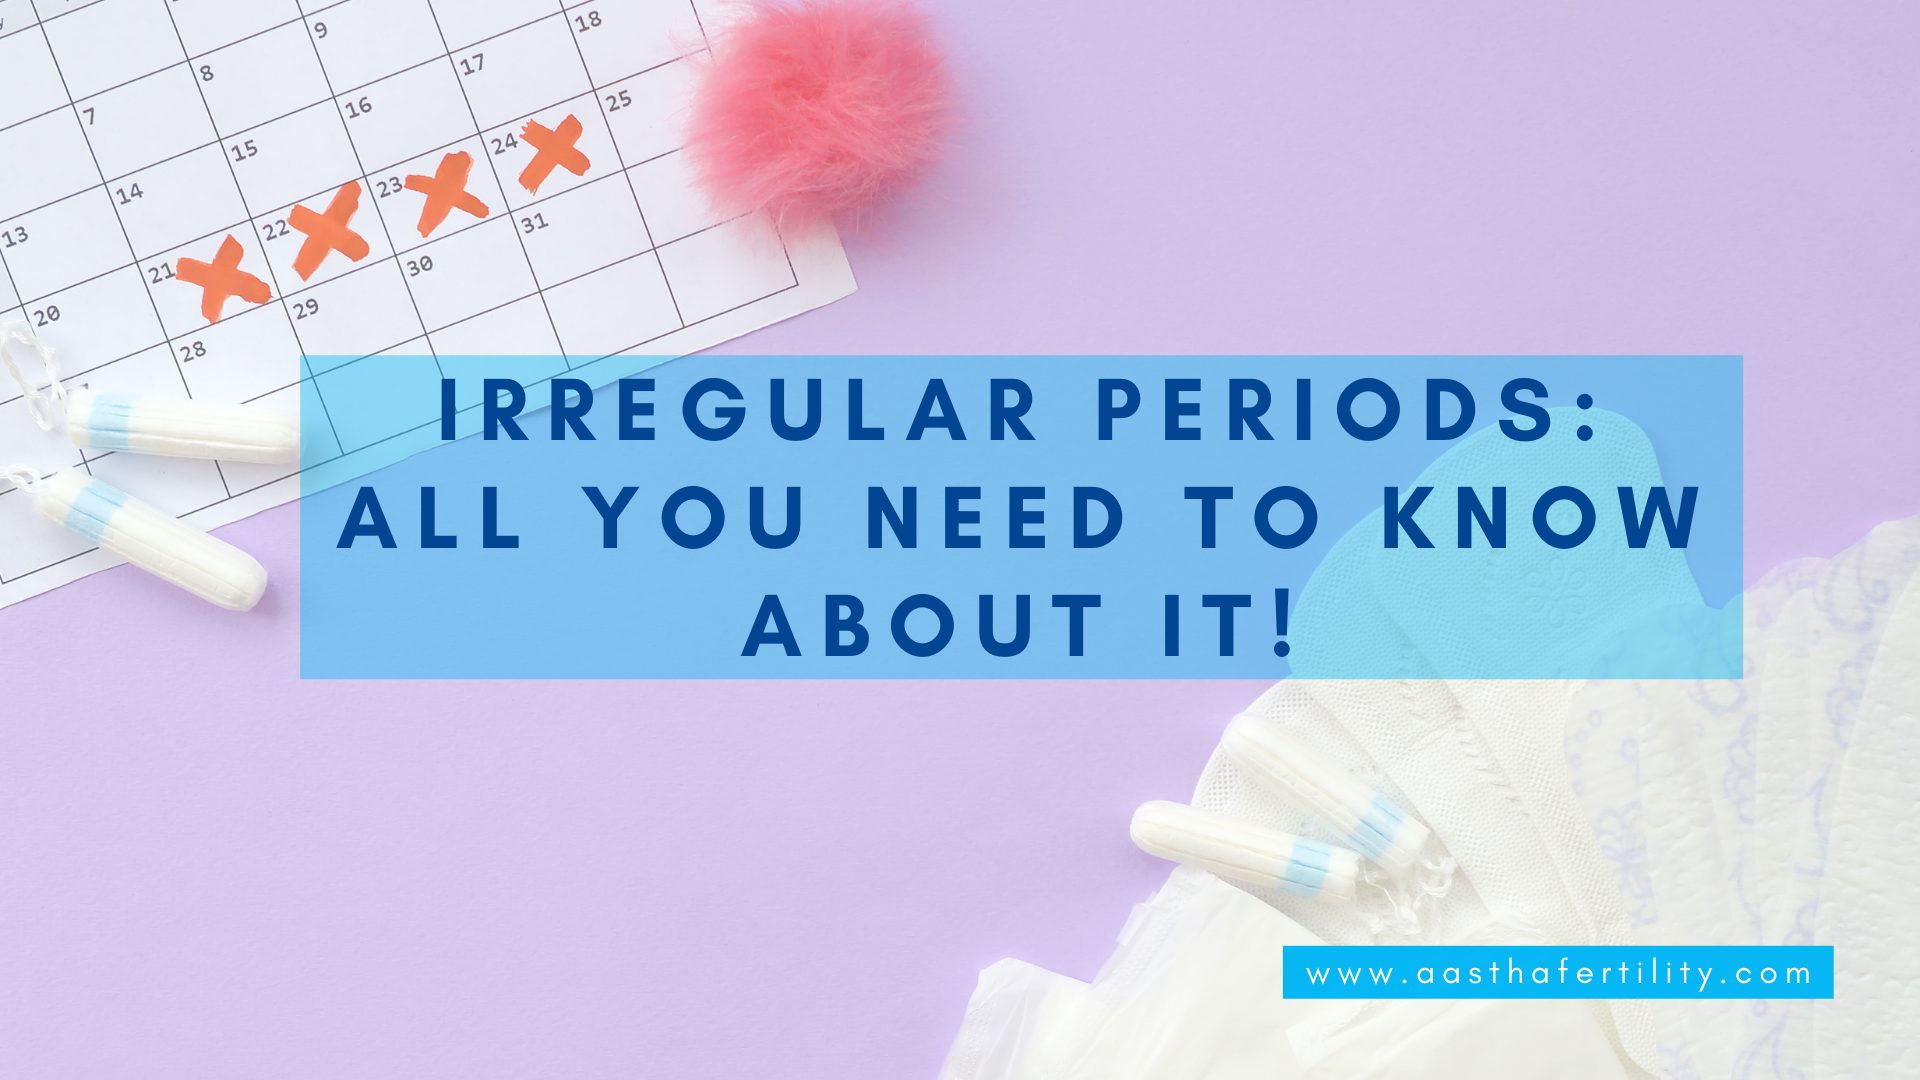 Irregular Periods All You Need to Know About It!